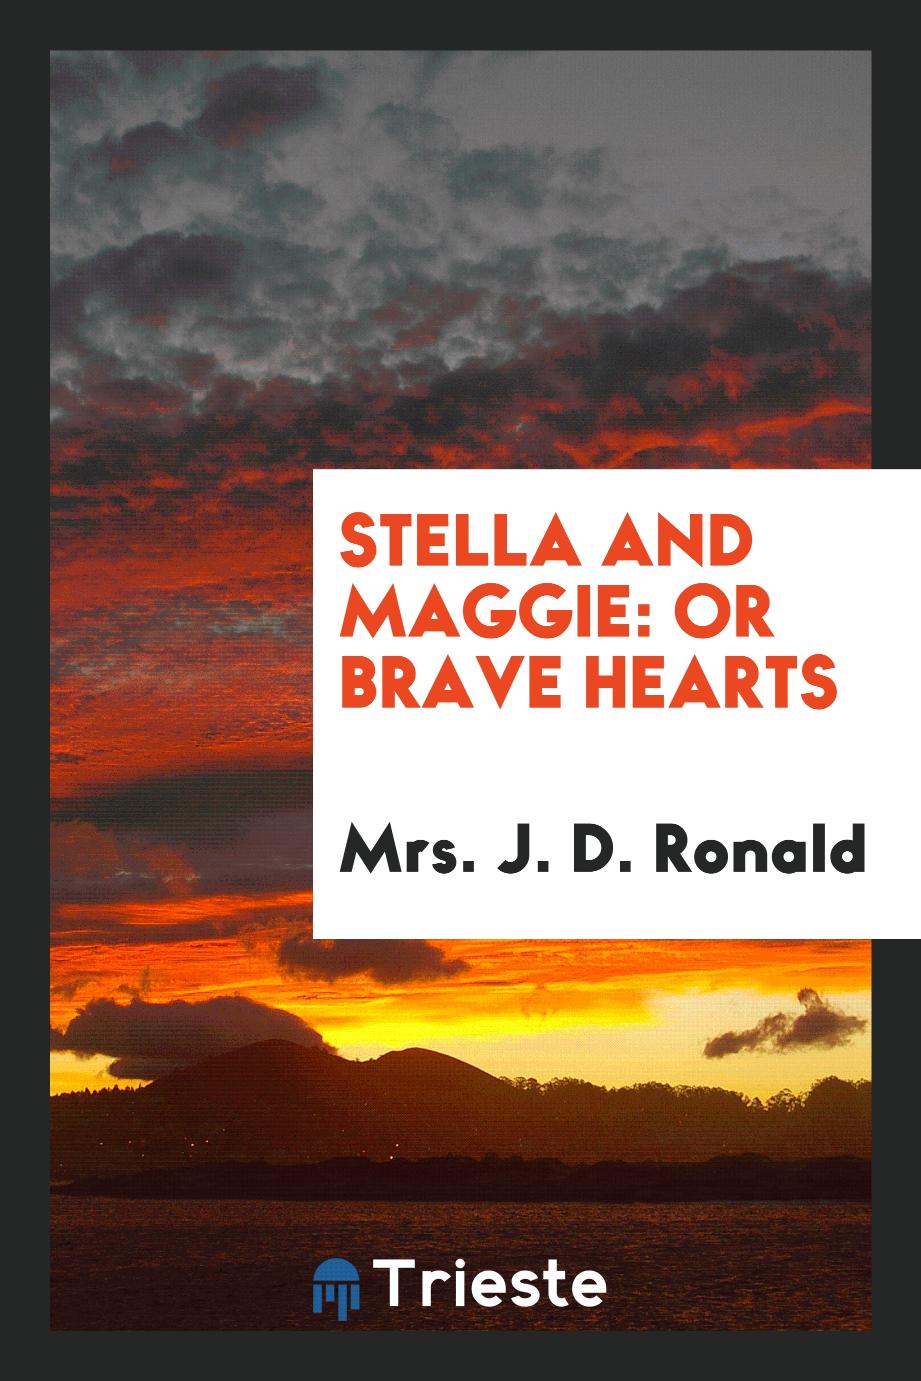 Stella and Maggie: Or Brave Hearts